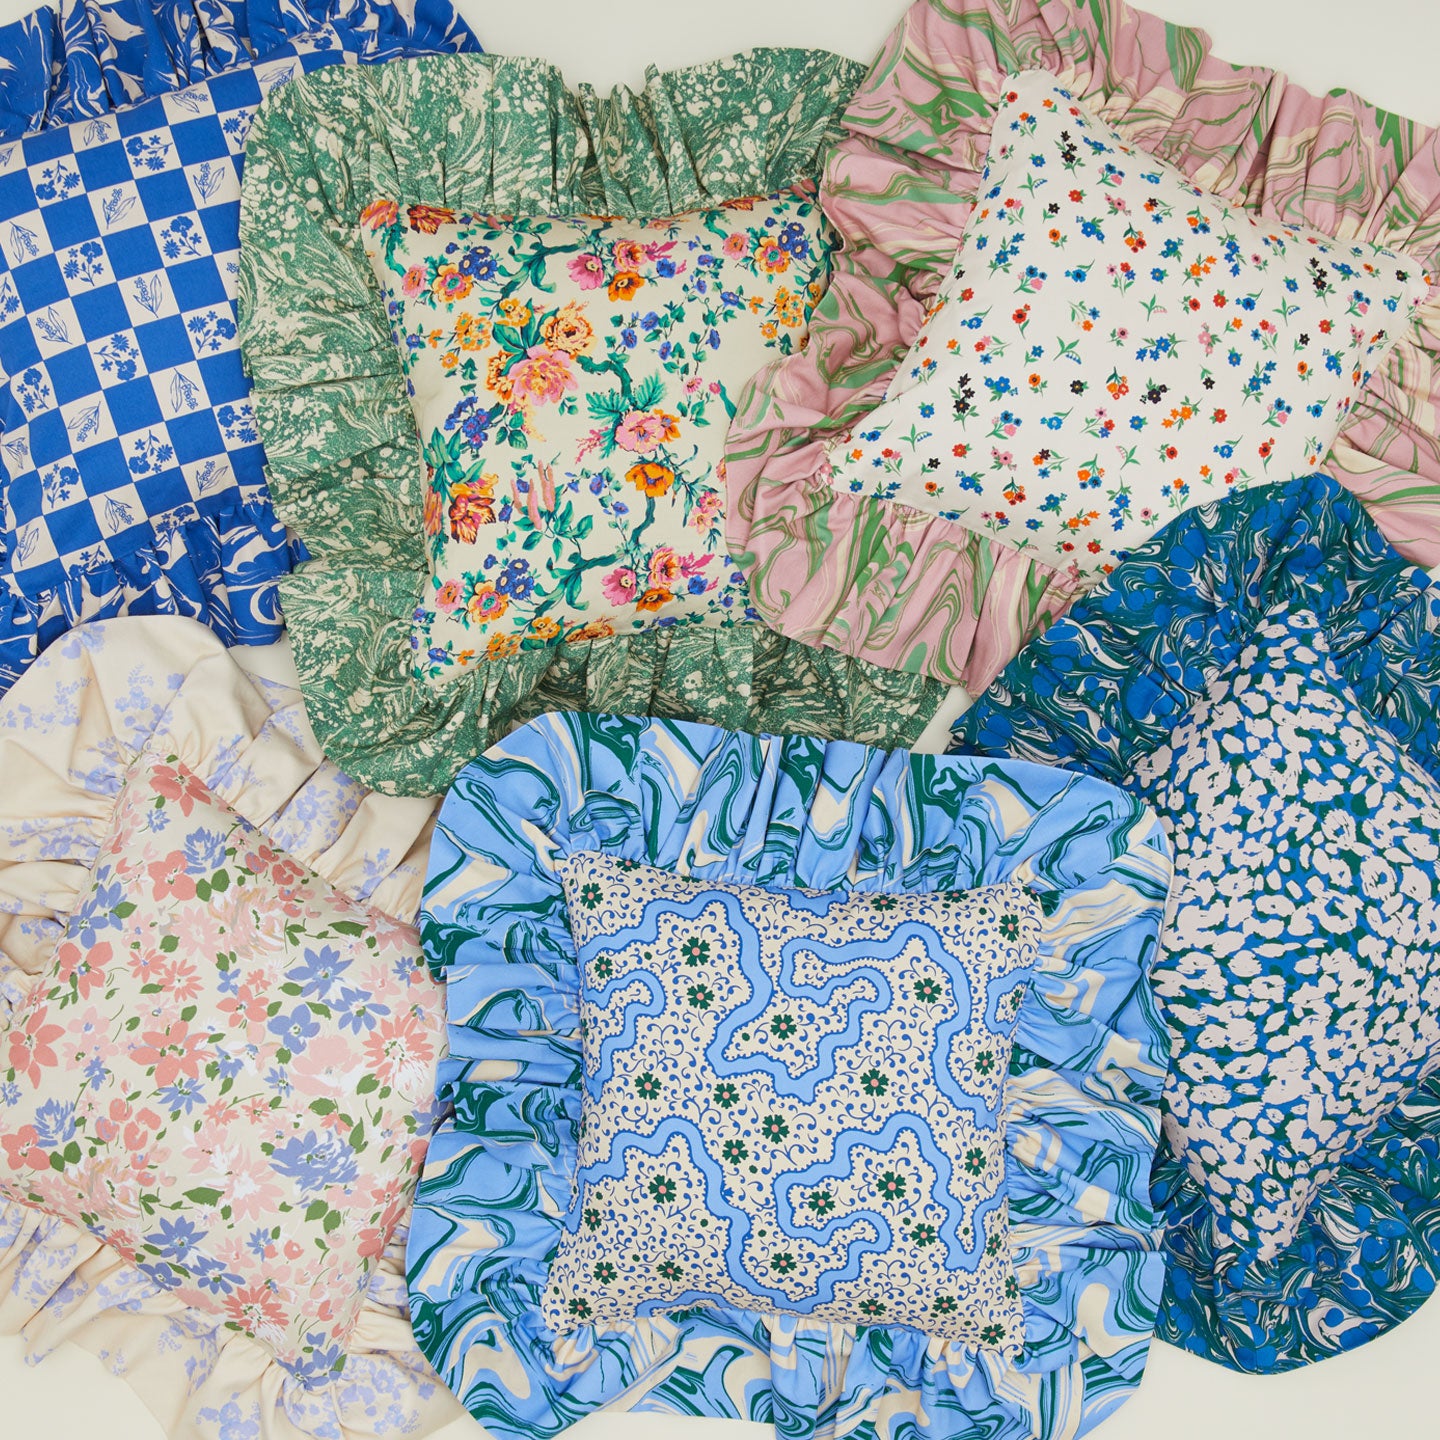 Six patterned ruffled floral cushions.